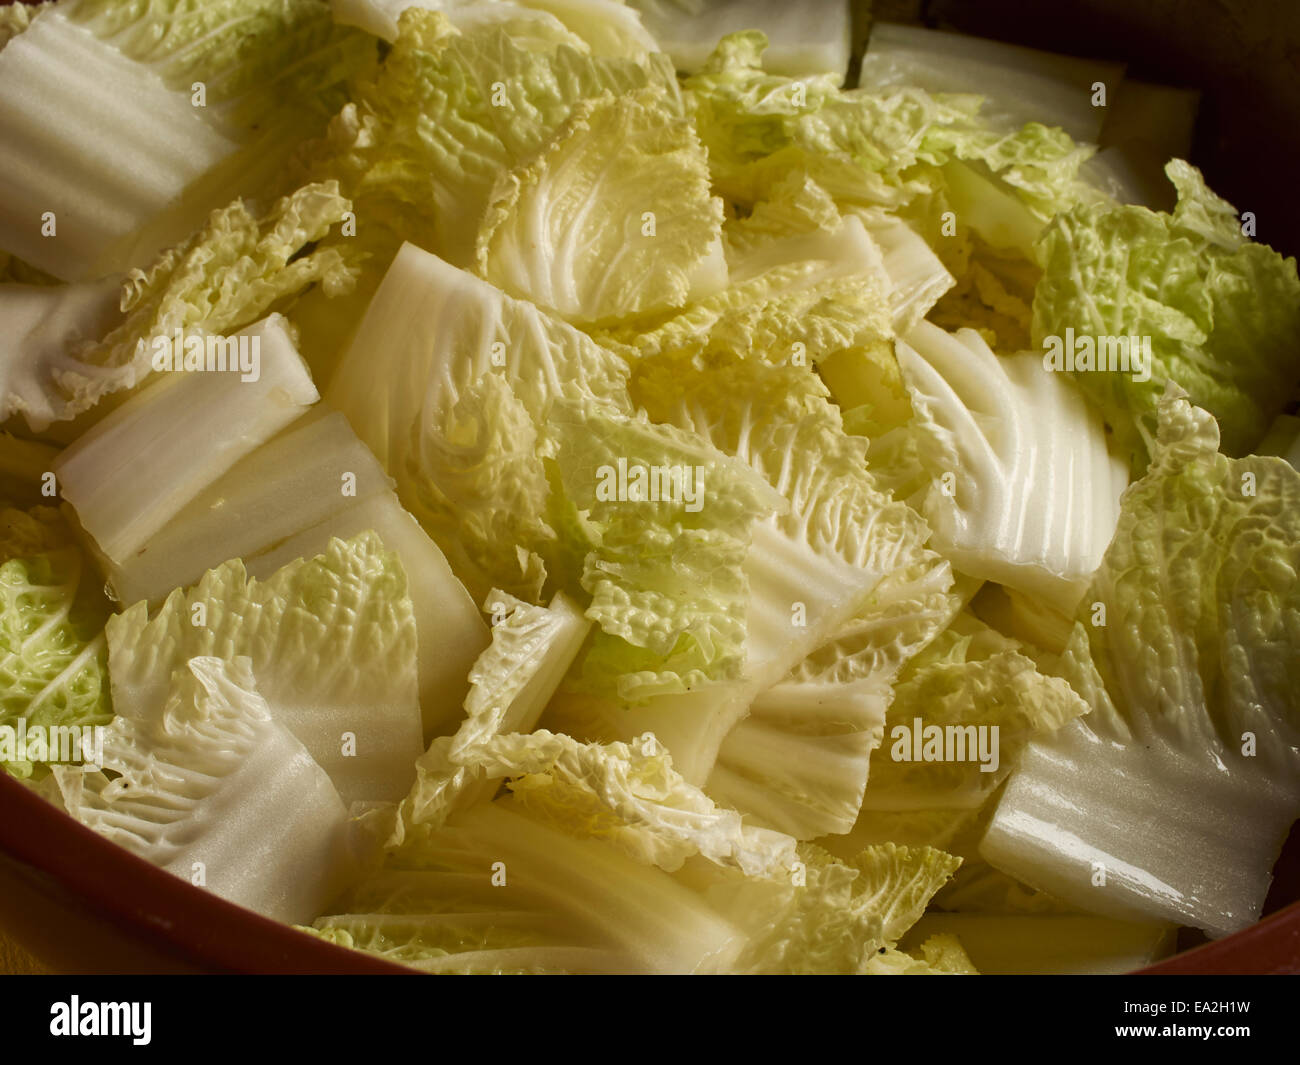 cut pieces of Napa Cabbage Stock Photo